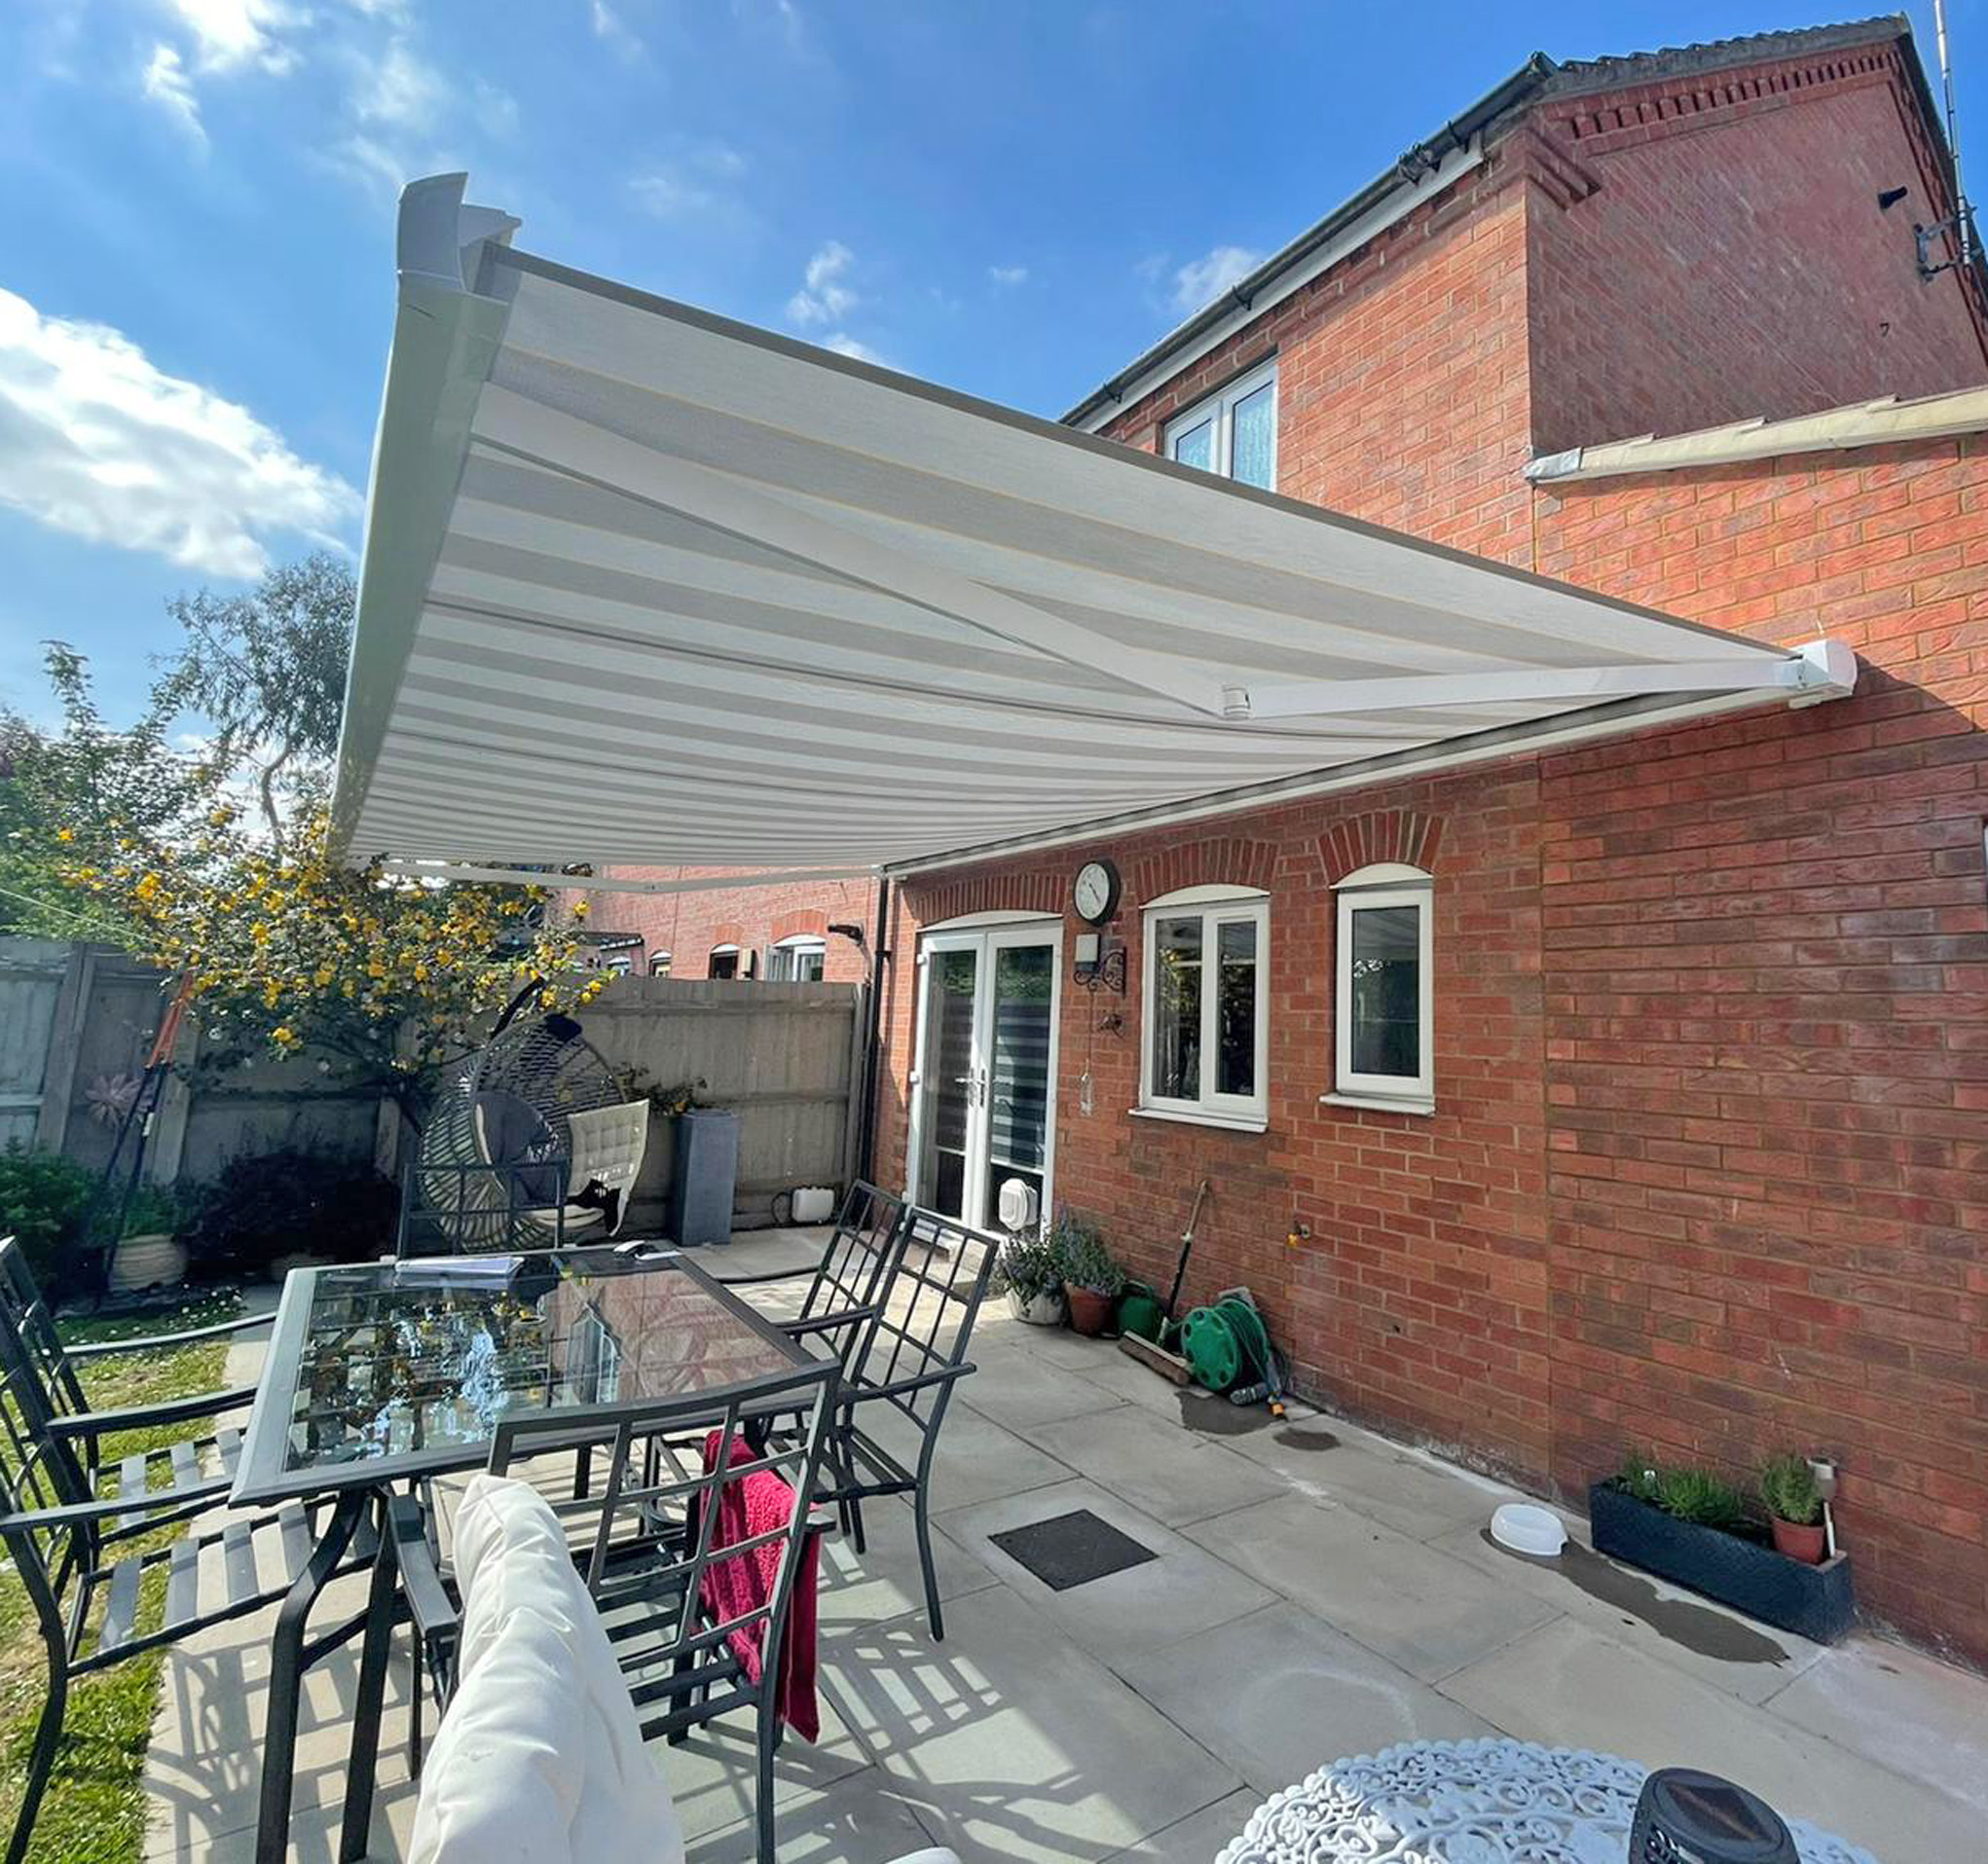 Birkdale 4.5m x 3m Green Fabric & White Frame With Remote Control Kiara Electric Awning